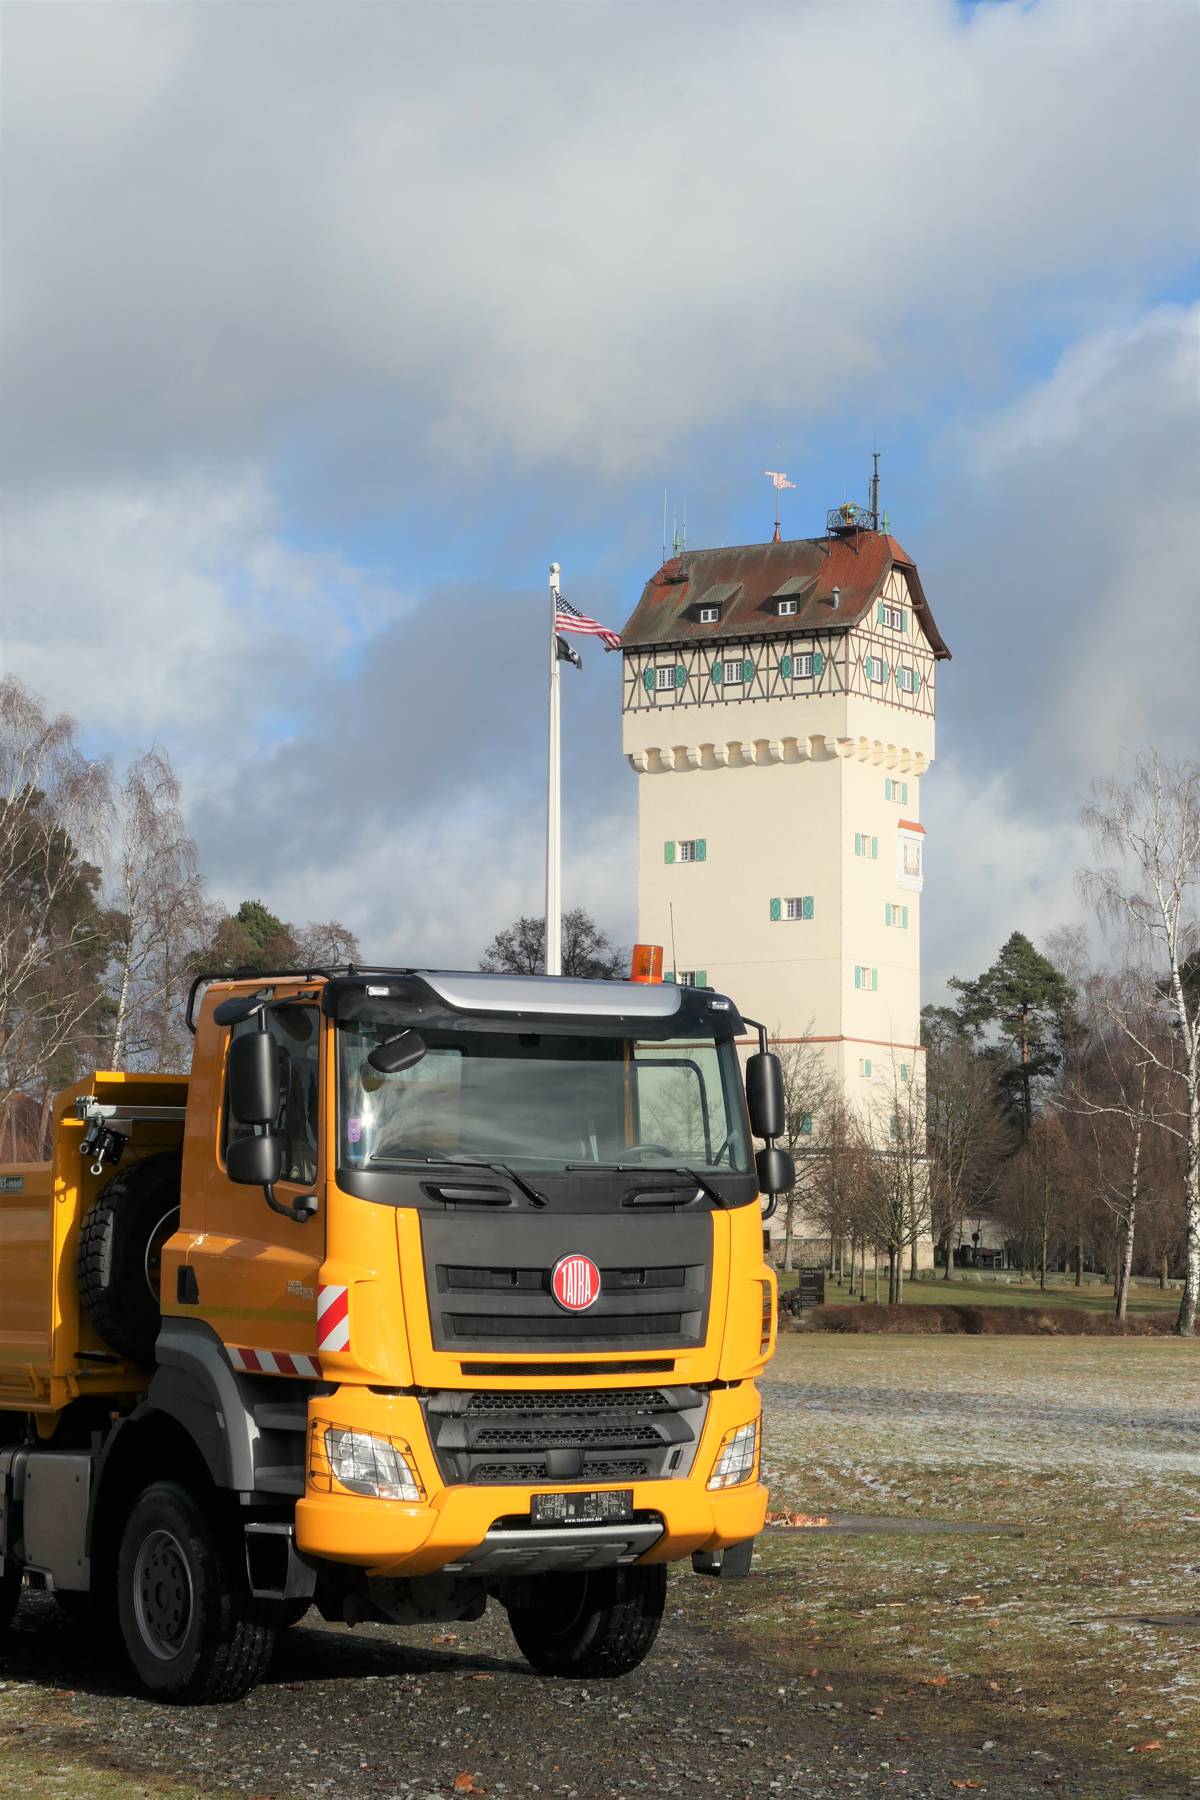 First Tatra Phoenix Trucks supplied to US Army for Training in Germany